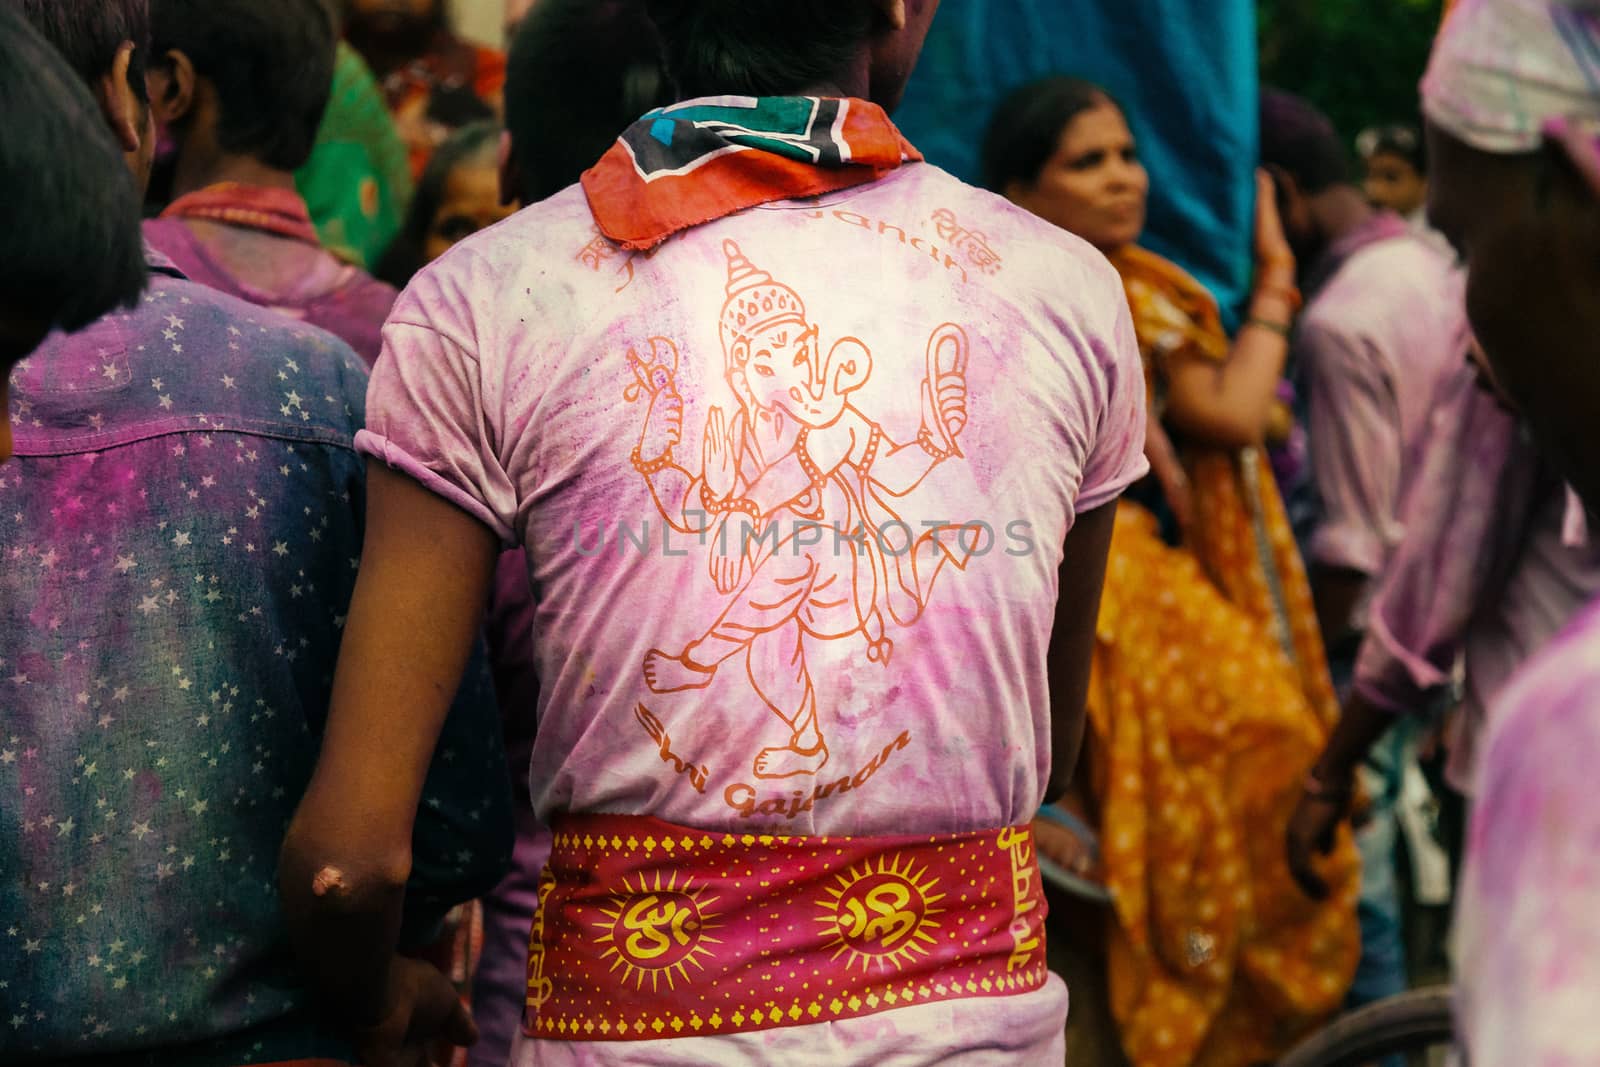 Devotee wearing Tshirts with Hindu God Idol and Om printed on it, during Ganpati Festival, 27 Sep 2015, Kanpur, INDIA